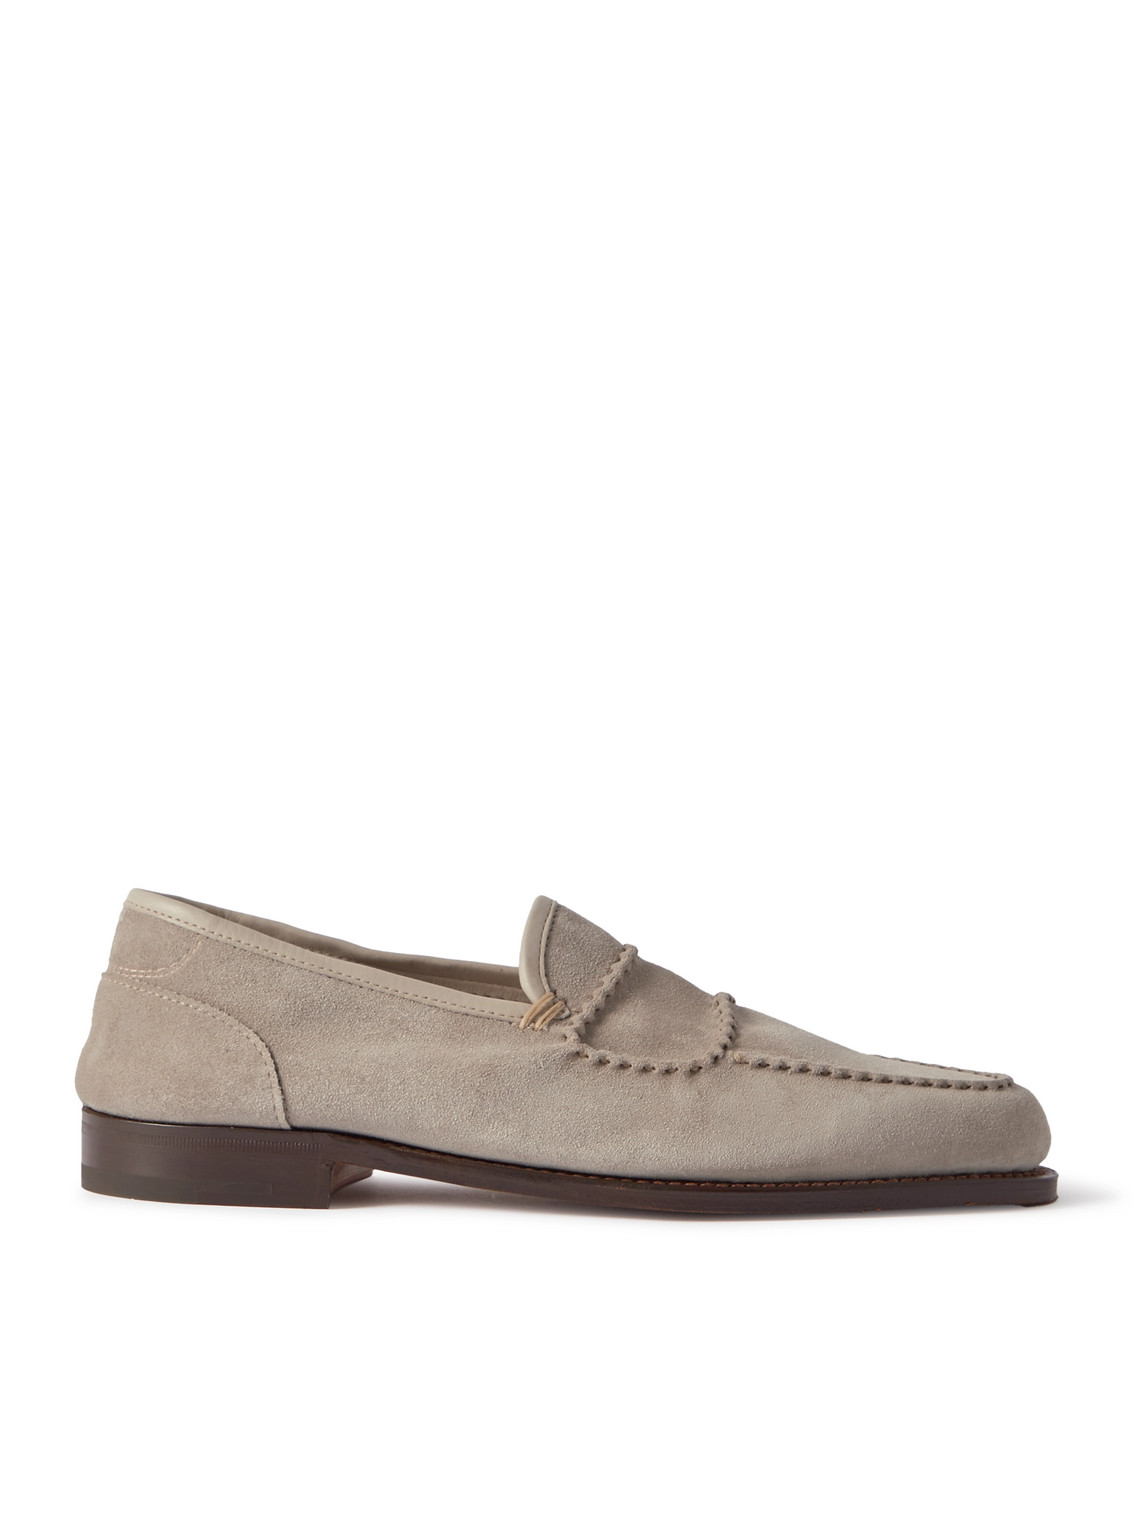 Bath Suede Loafers